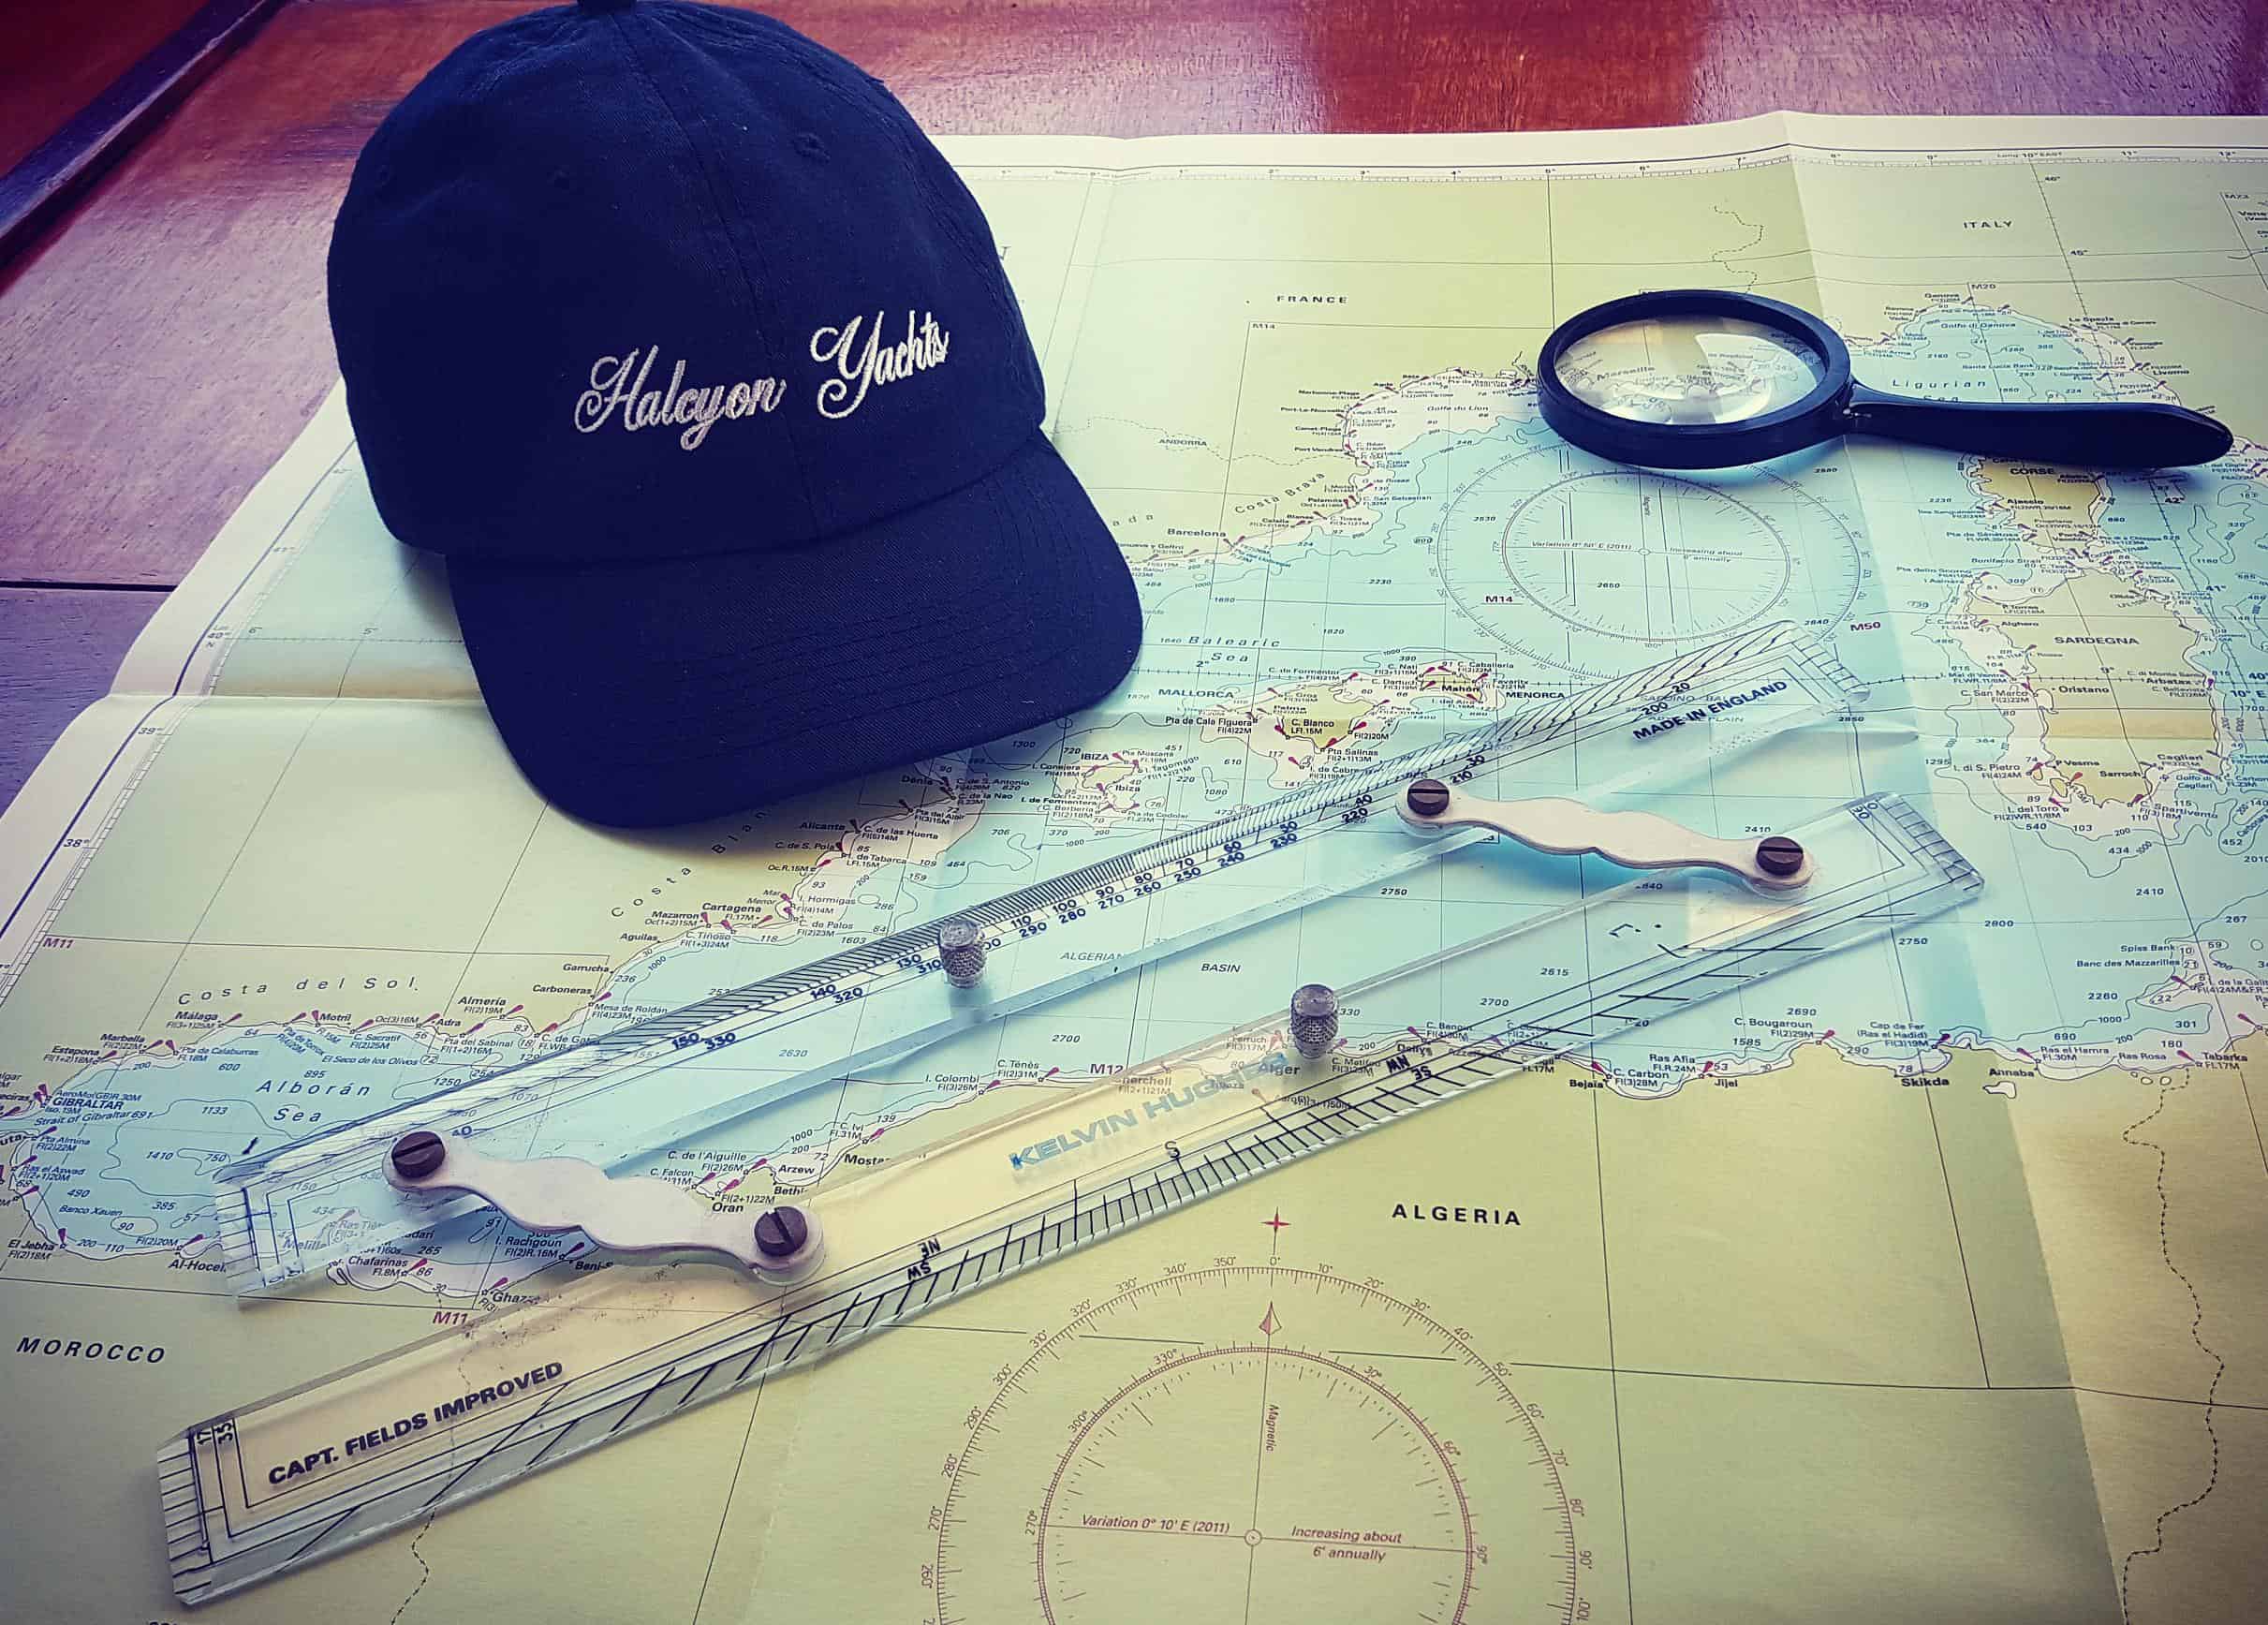 Imray paper charts of the mediterranean with a hat and dividers